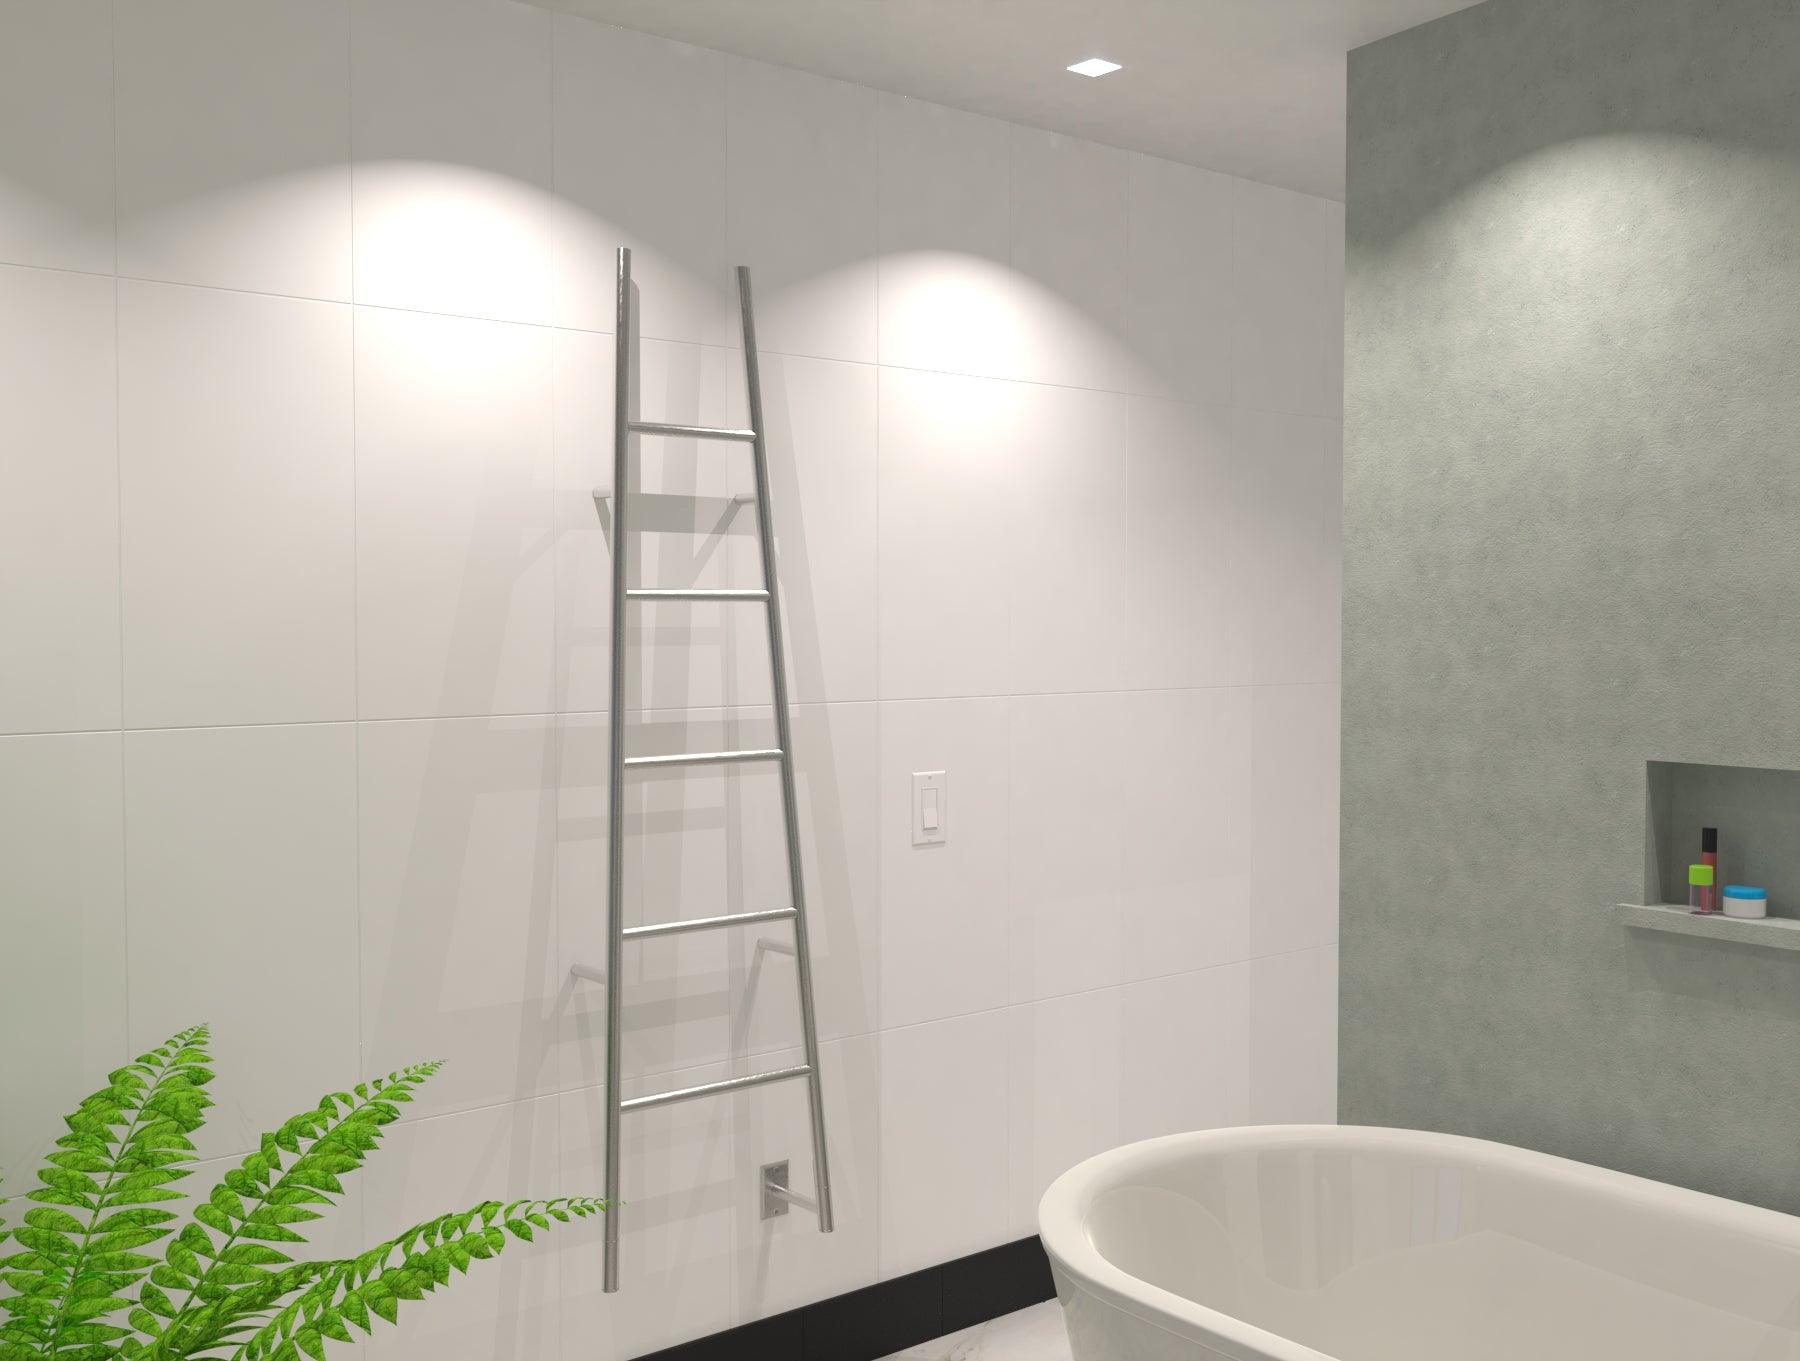 The Ultimate Guide to Towel Warmers and How They Can Improve Your Home